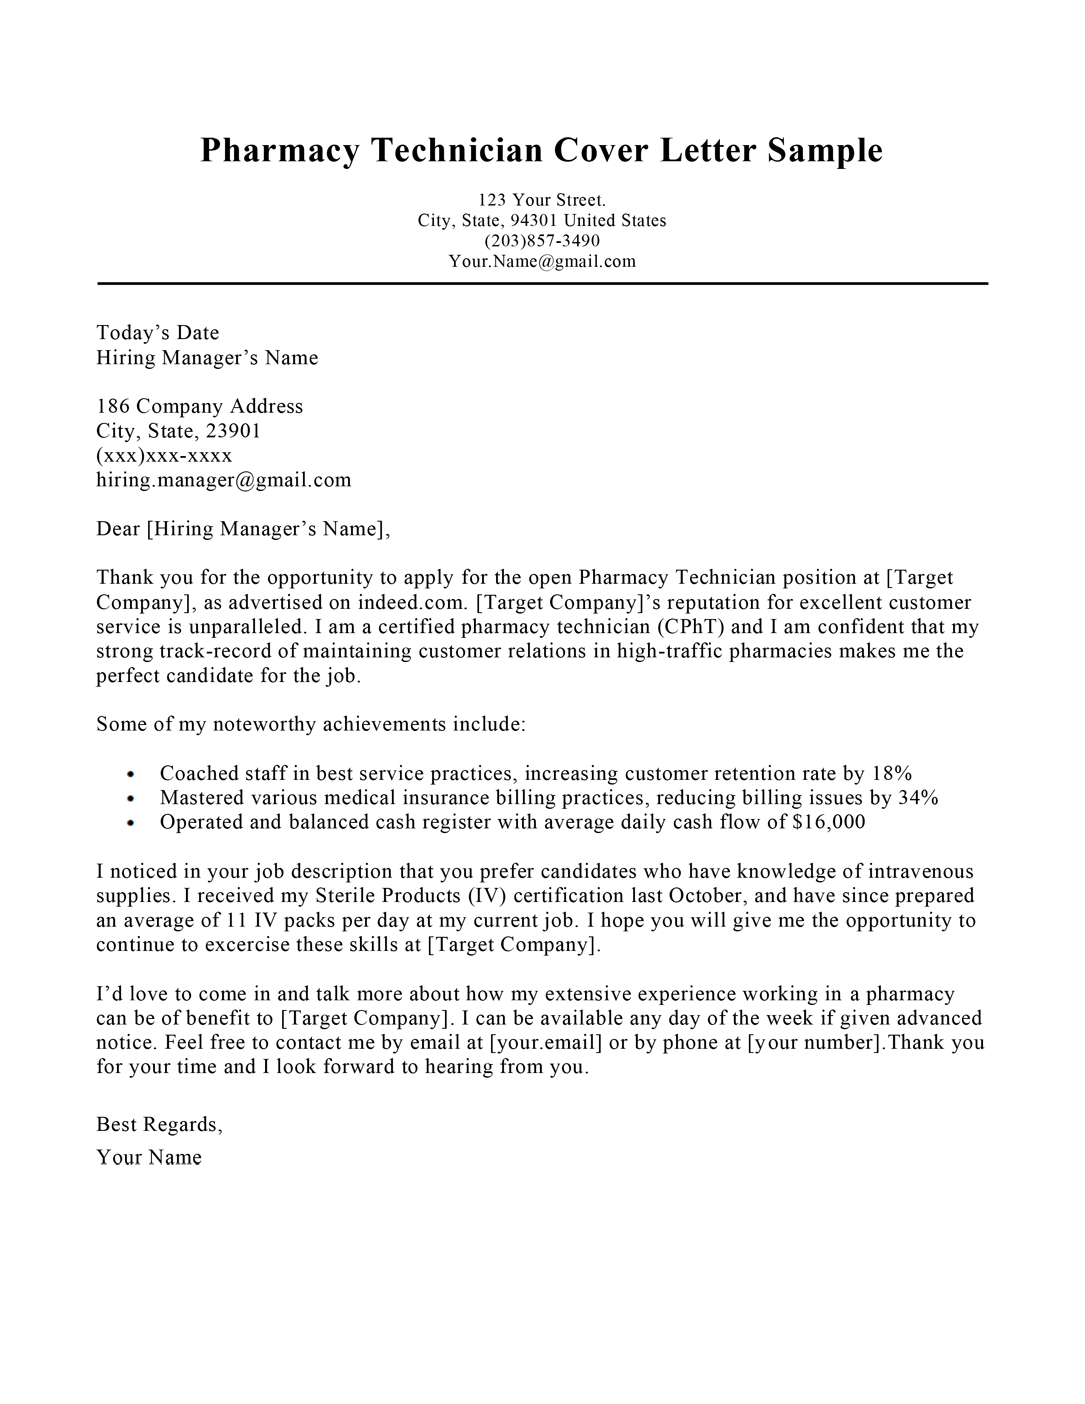 Cover Letter For Job Sample from resumecompanion.com